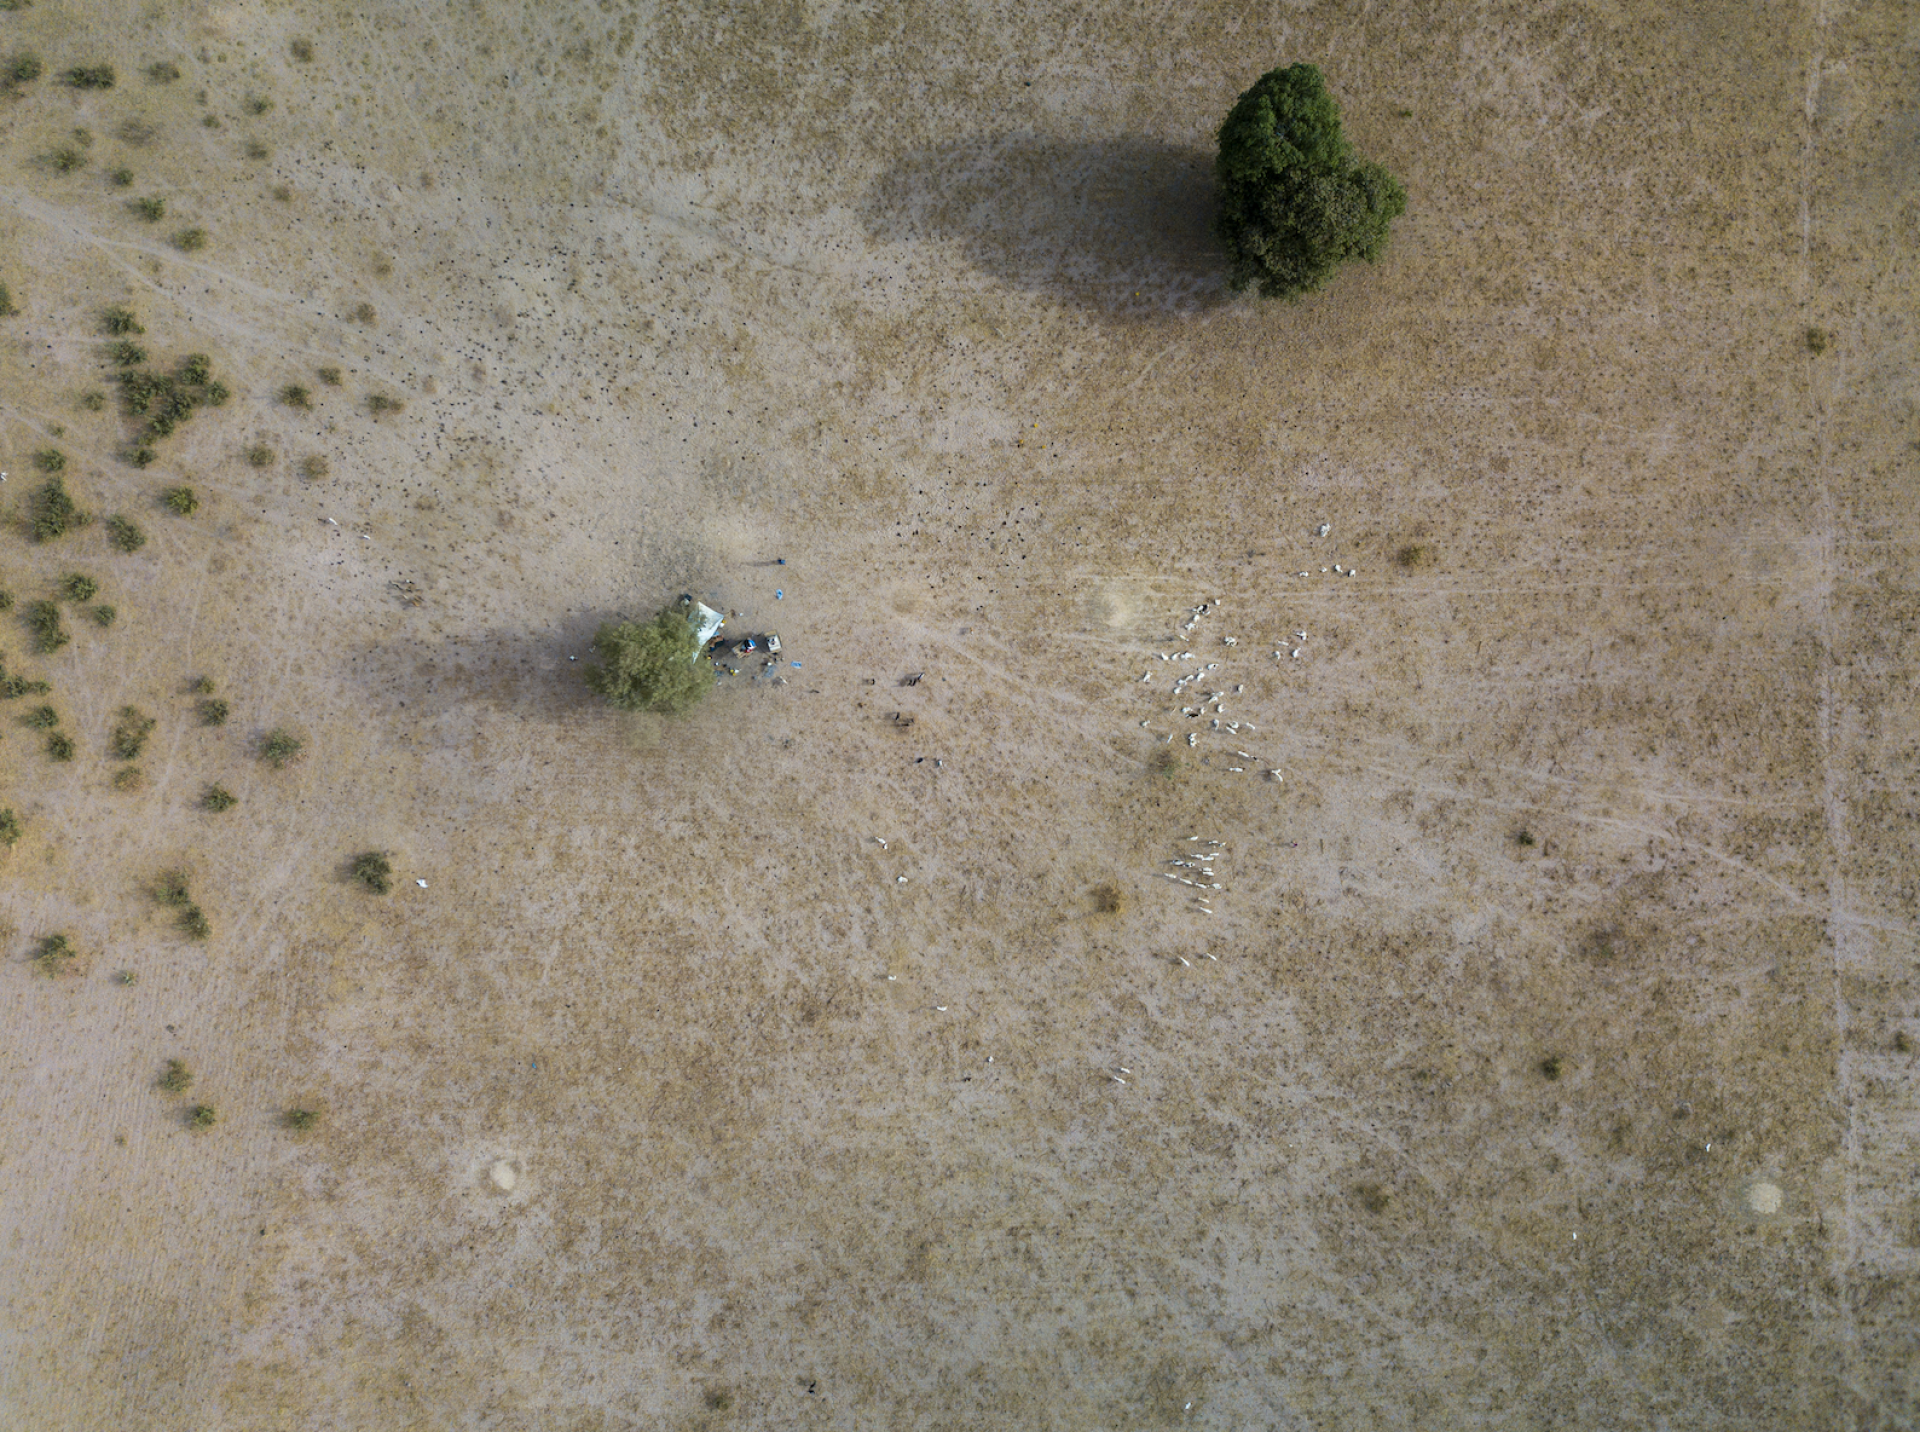 Aerial view of cattle on land in Senegal